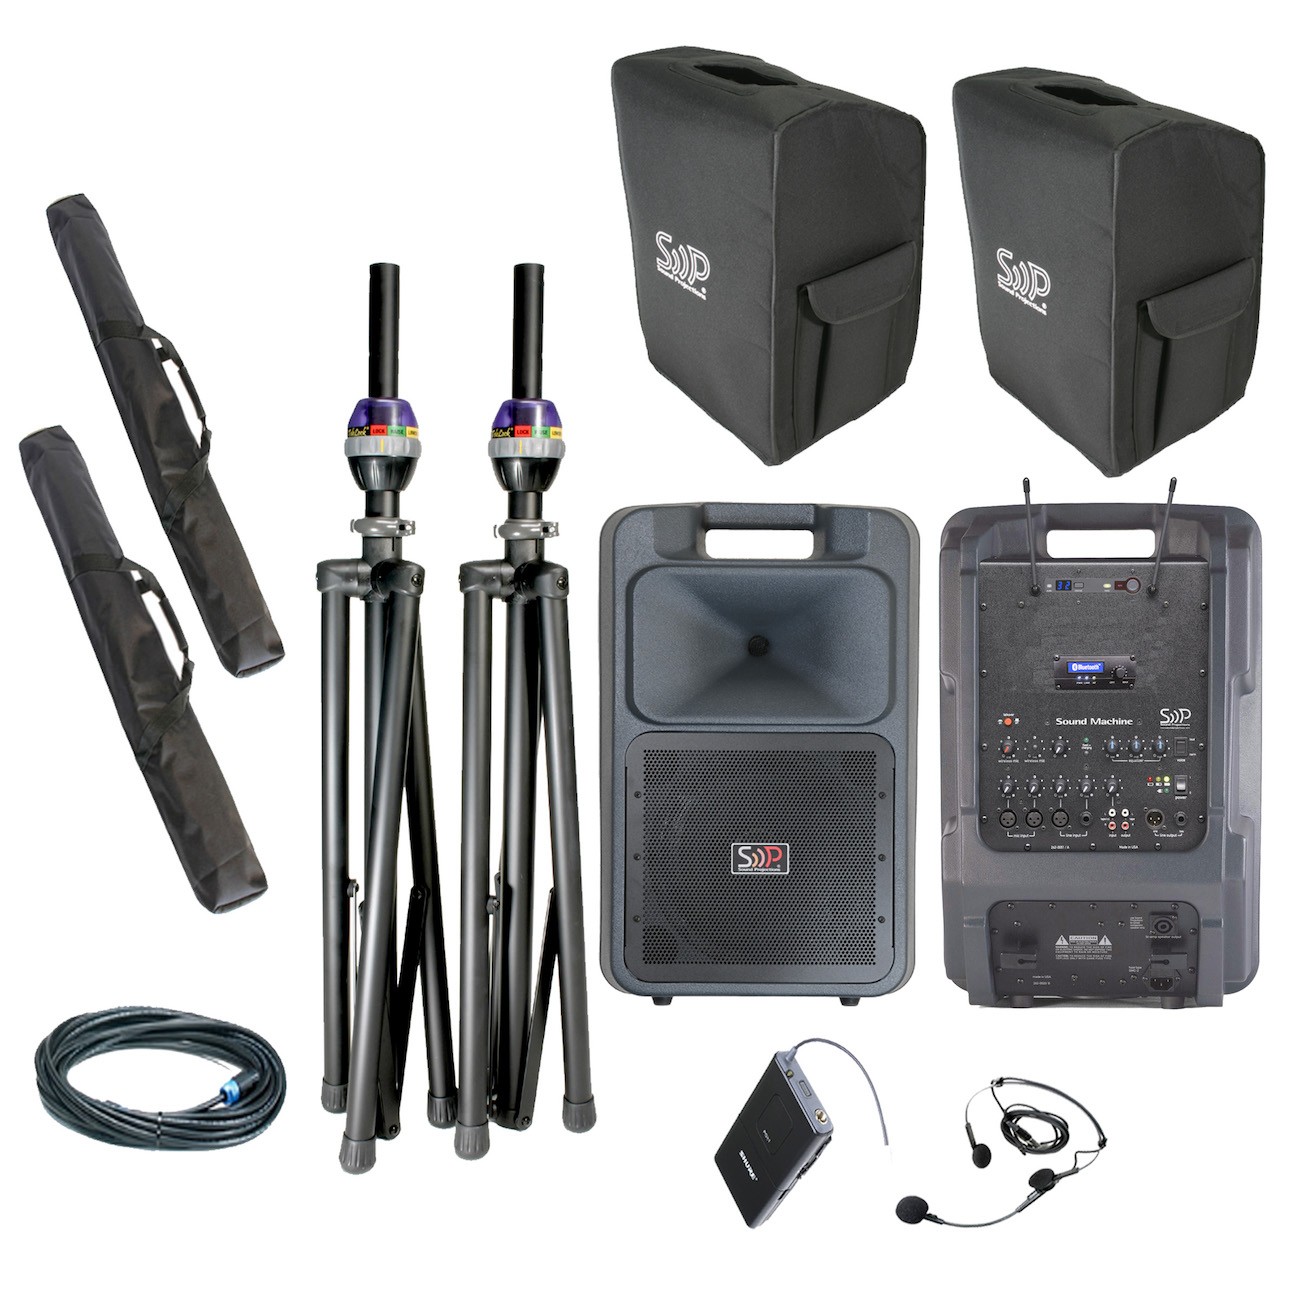 Sound Projections SM-5D Deluxe 60ch Digital Headset Wireless OPT-600 Pkg with Comp Speaker 